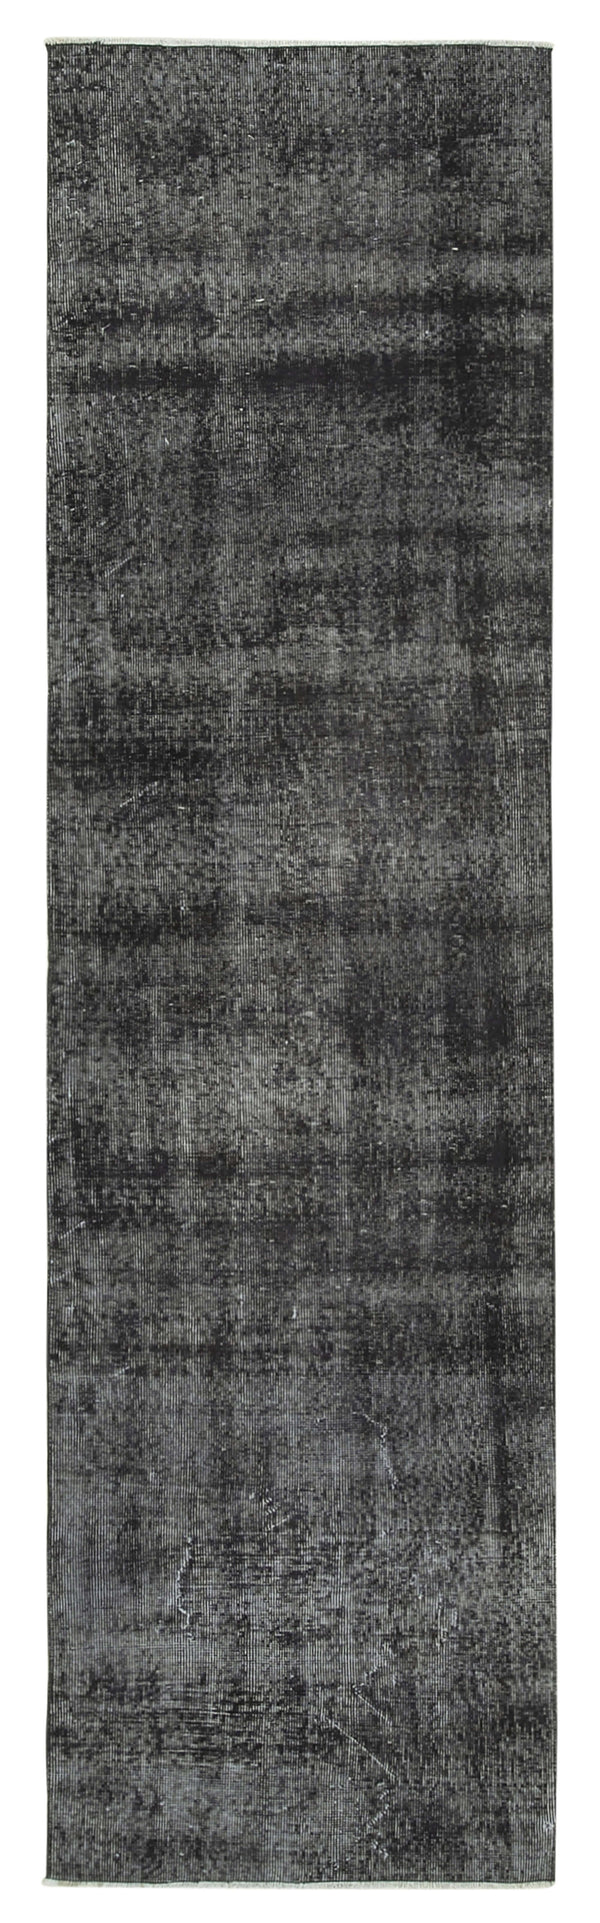 Handmade Overdyed Runner > Design# OL-AC-38147 > Size: 2'-7" x 9'-6", Carpet Culture Rugs, Handmade Rugs, NYC Rugs, New Rugs, Shop Rugs, Rug Store, Outlet Rugs, SoHo Rugs, Rugs in USA